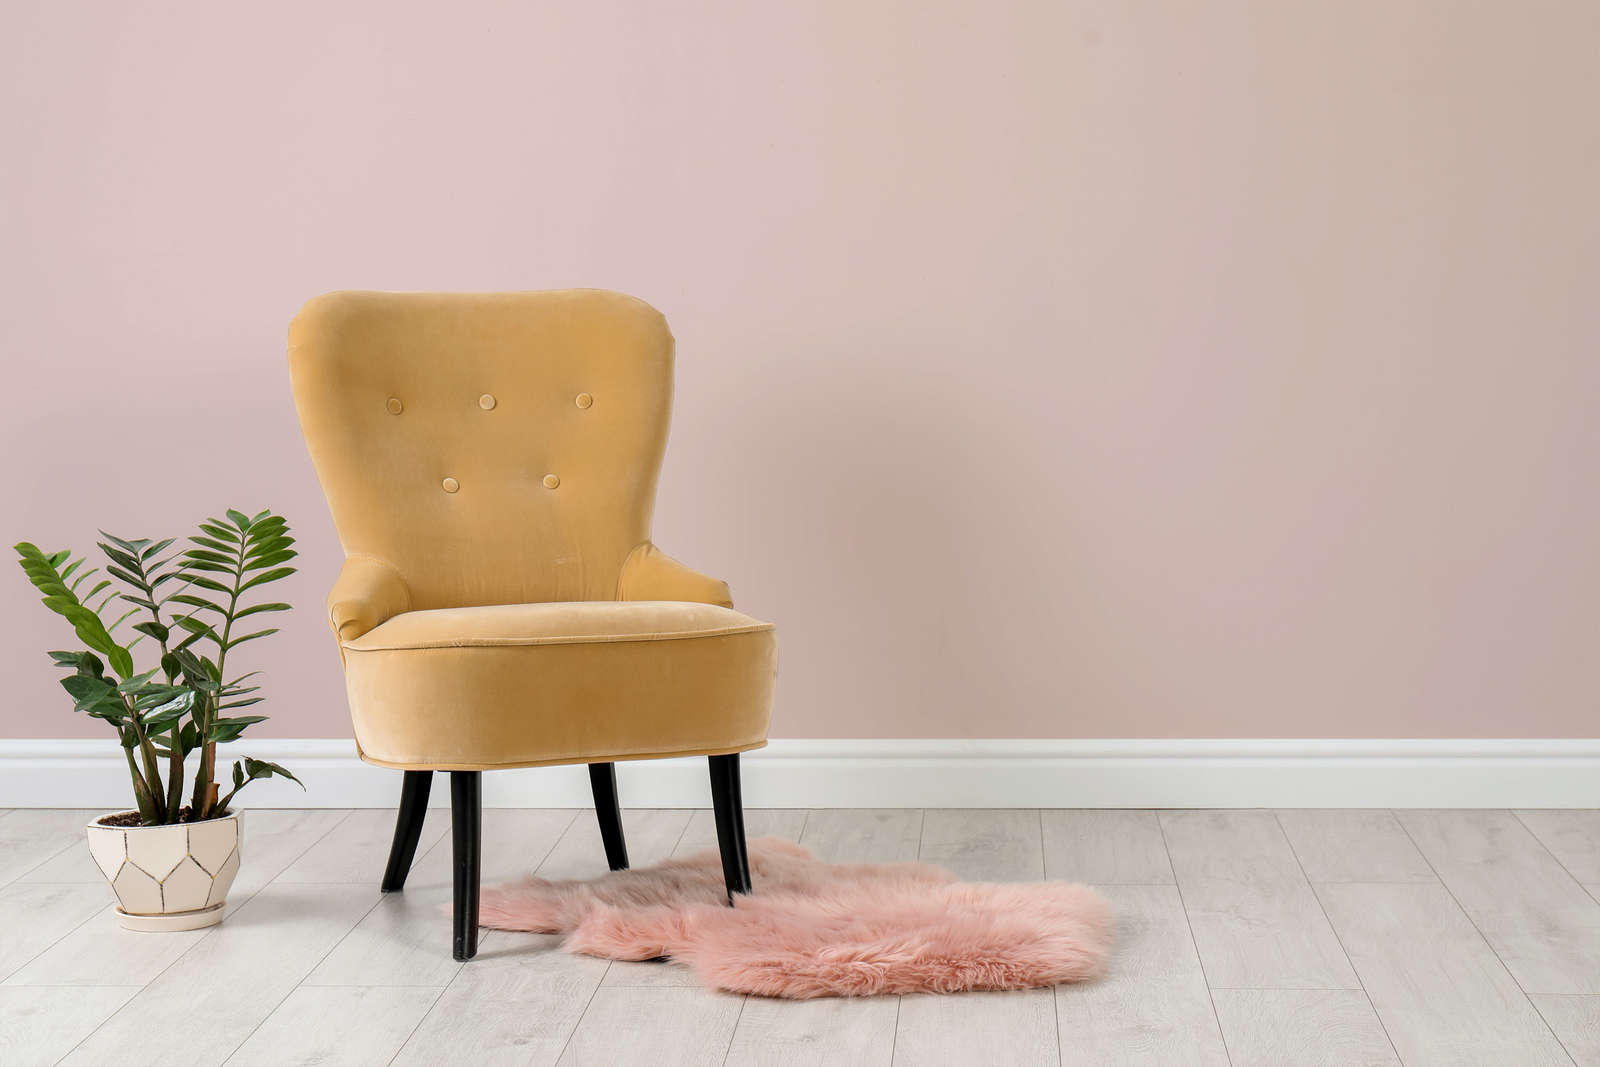             Wall Paint TCK7007 »Sweet Strawberry» an interplay of pink and beige – 5.0 litre
        